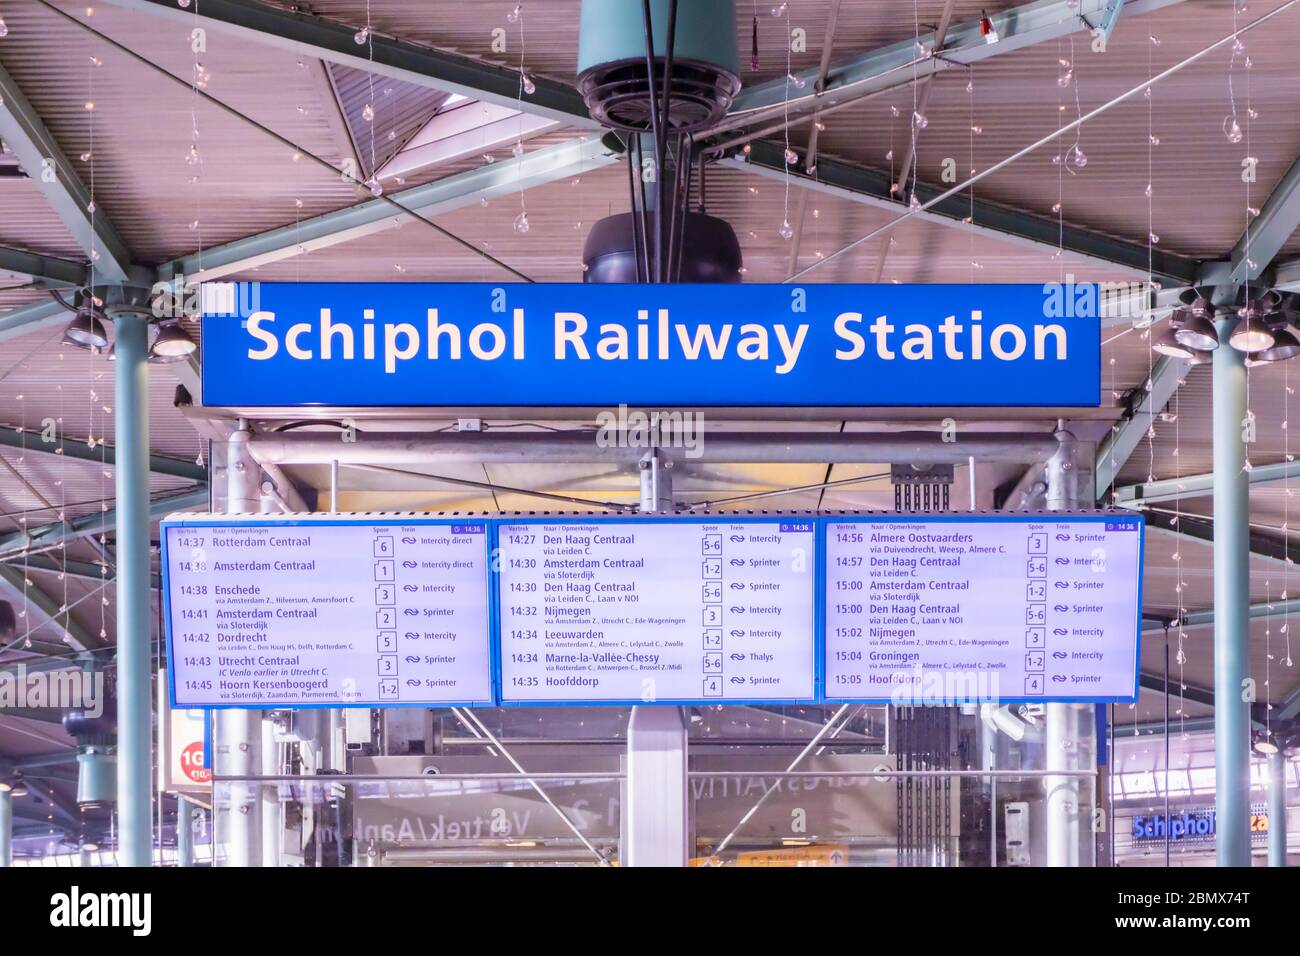 Schiphol, The Netherlands - January 16, 2020: Dutch railway station departure information screens on Schiphol Airport, The Netherlands Stock Photo